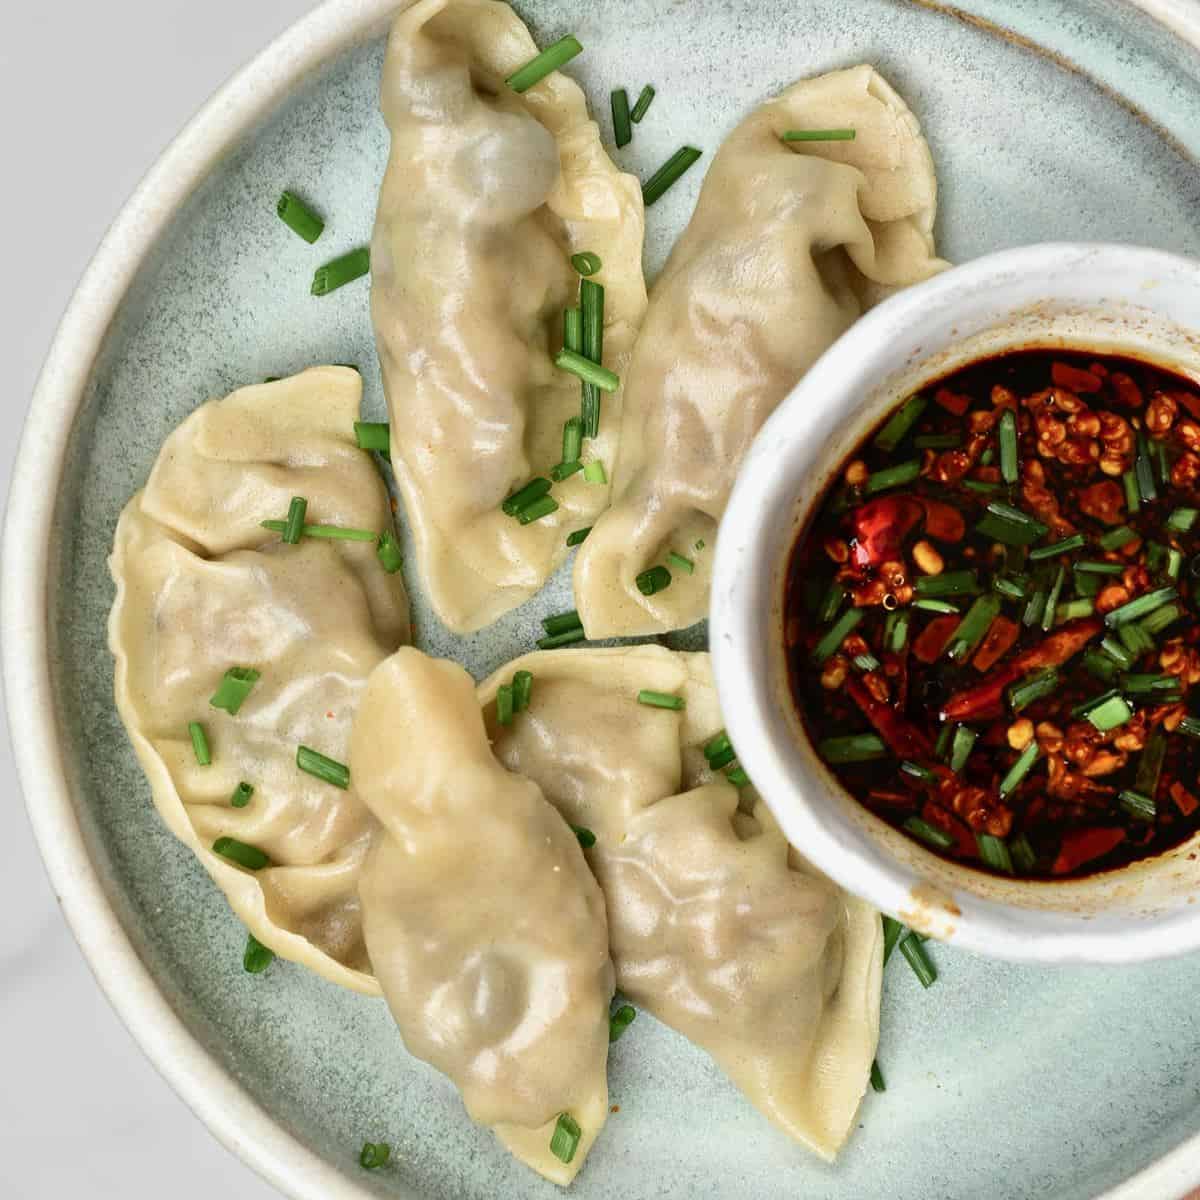 Mushroom dumplings with dipping sauce on a plate